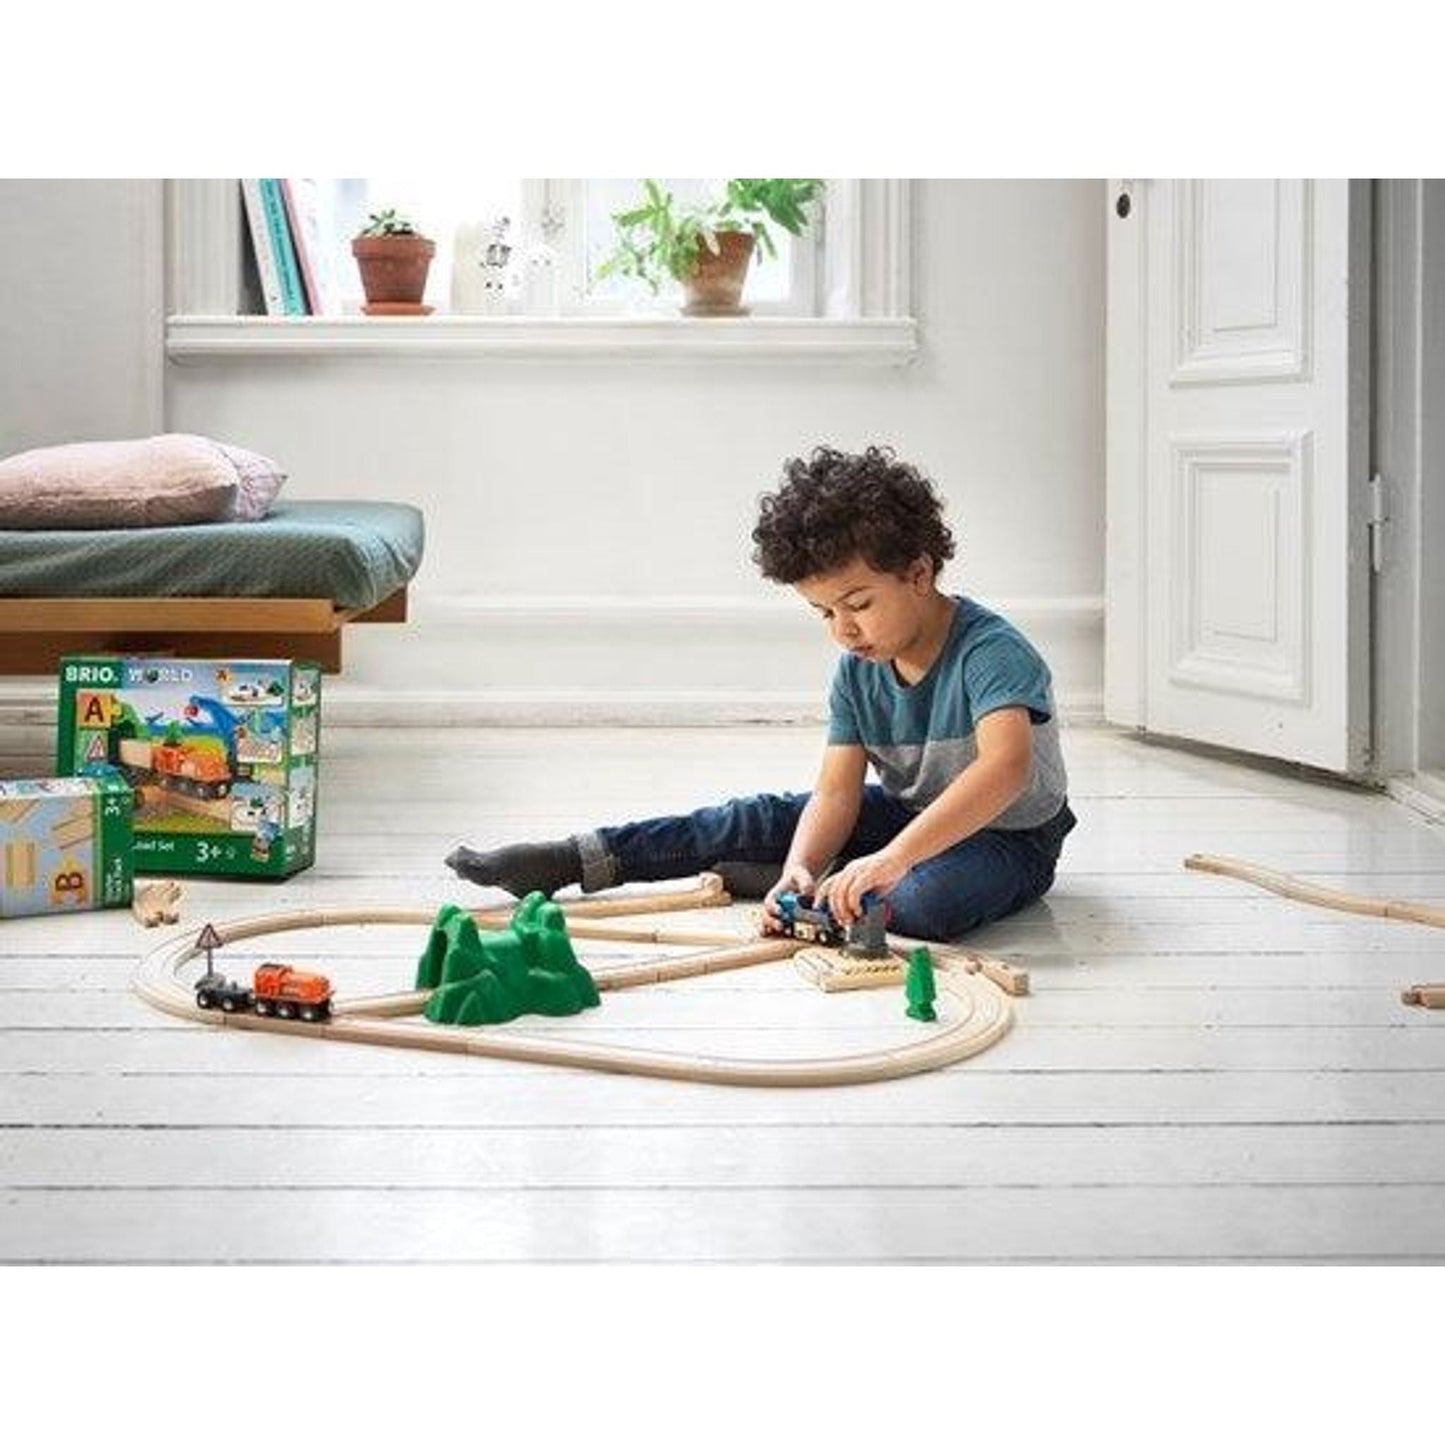 Brio Tracks - Starter Track Pack B - 13 Pieces - Toybox Tales